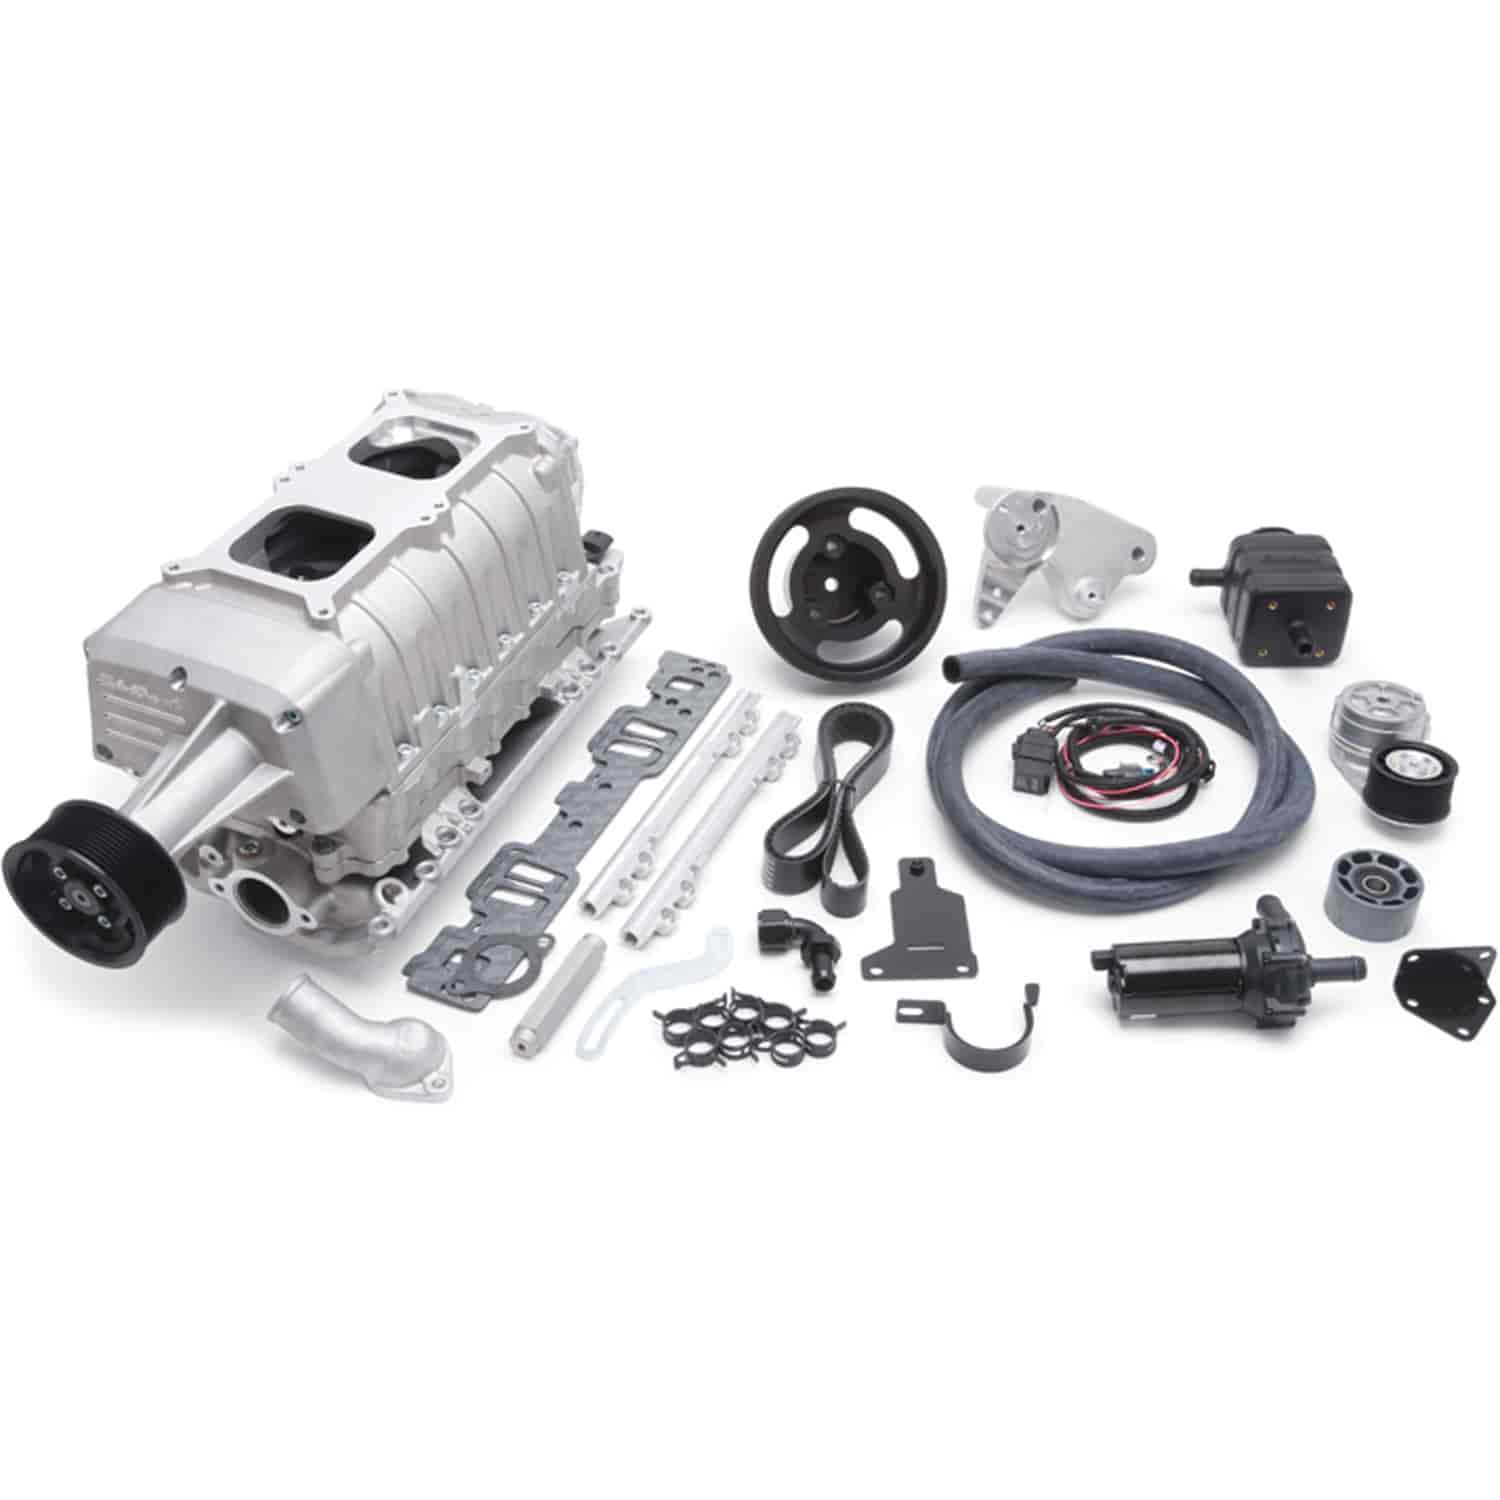 E-Force Enforcer RPM Complete EFI Polished Supercharger Kit for 1955-1986 Small Block Chevy with Vortec Heads